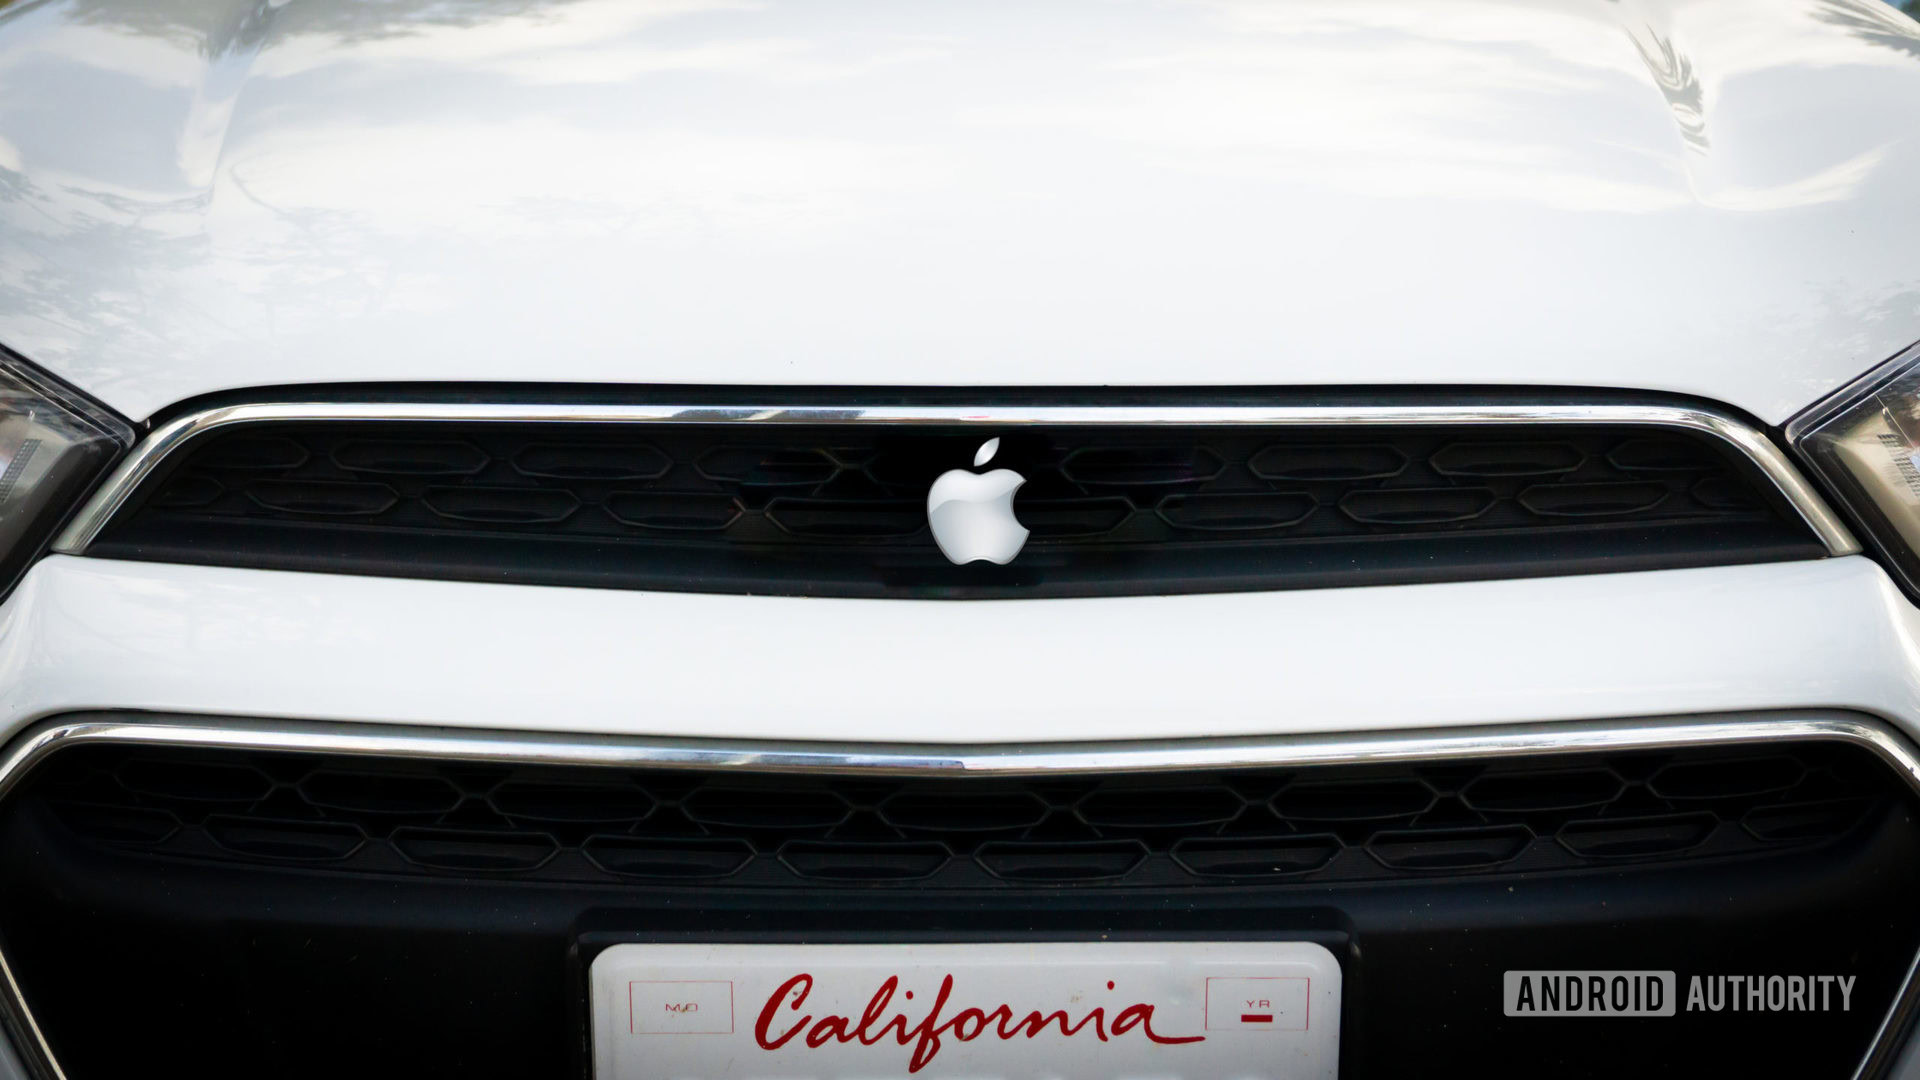 Apple Car Mockup showing front closeup of vehicle with the Apple logo.